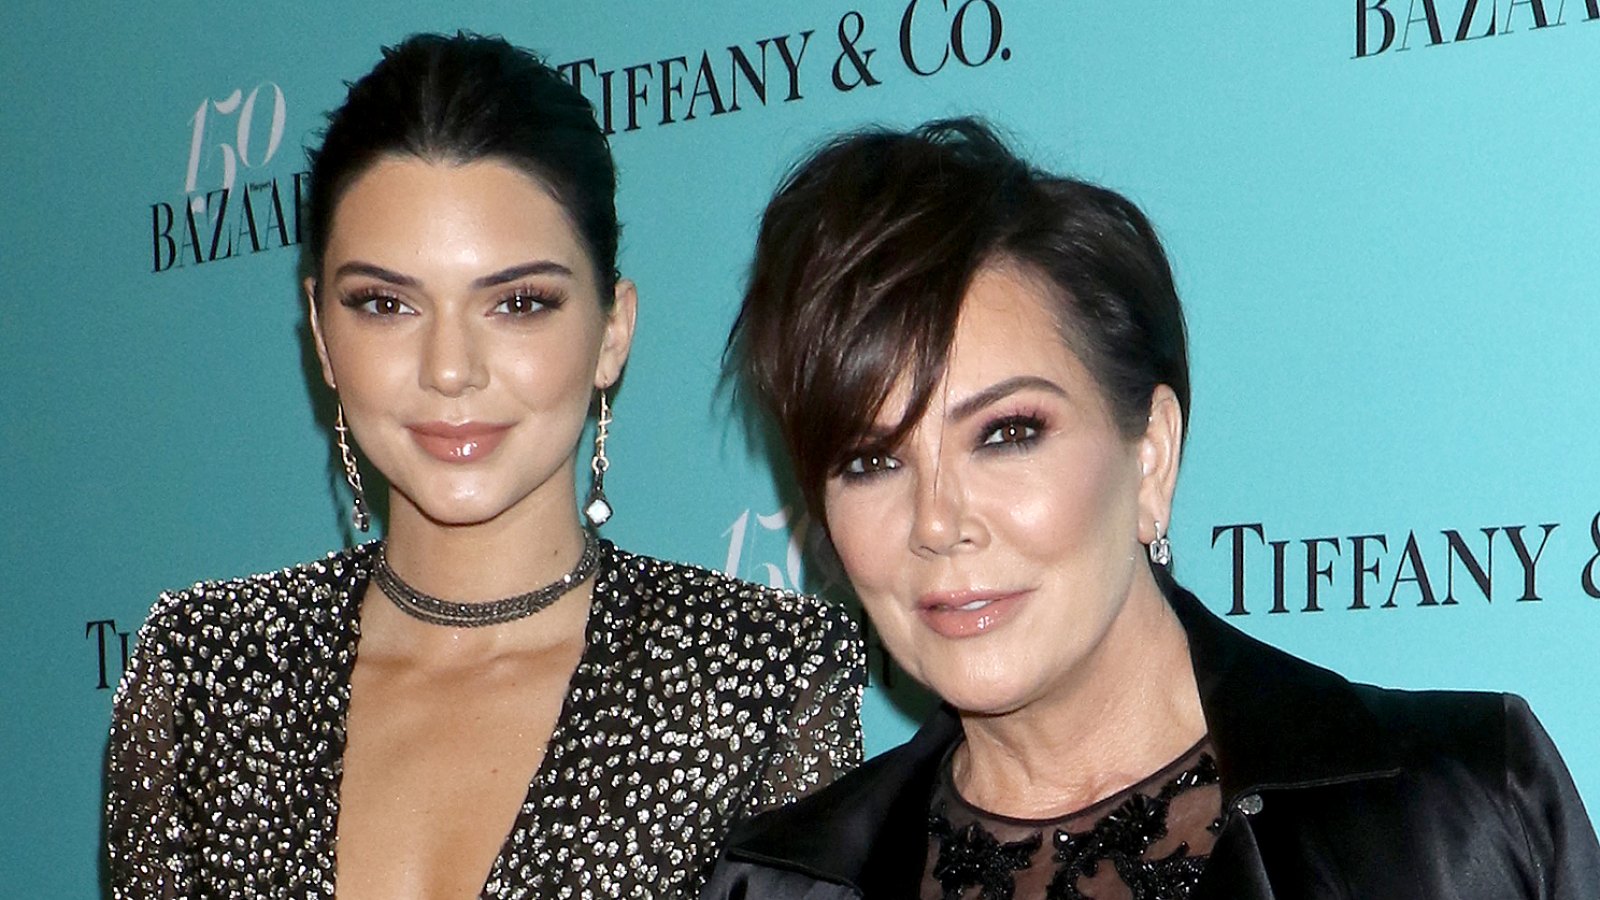 Kris-Jenner-Thinks-Kendall-Jenner-Could-Give-Be-the-Next-Daughter-to-Give-Her-a-Grandchild